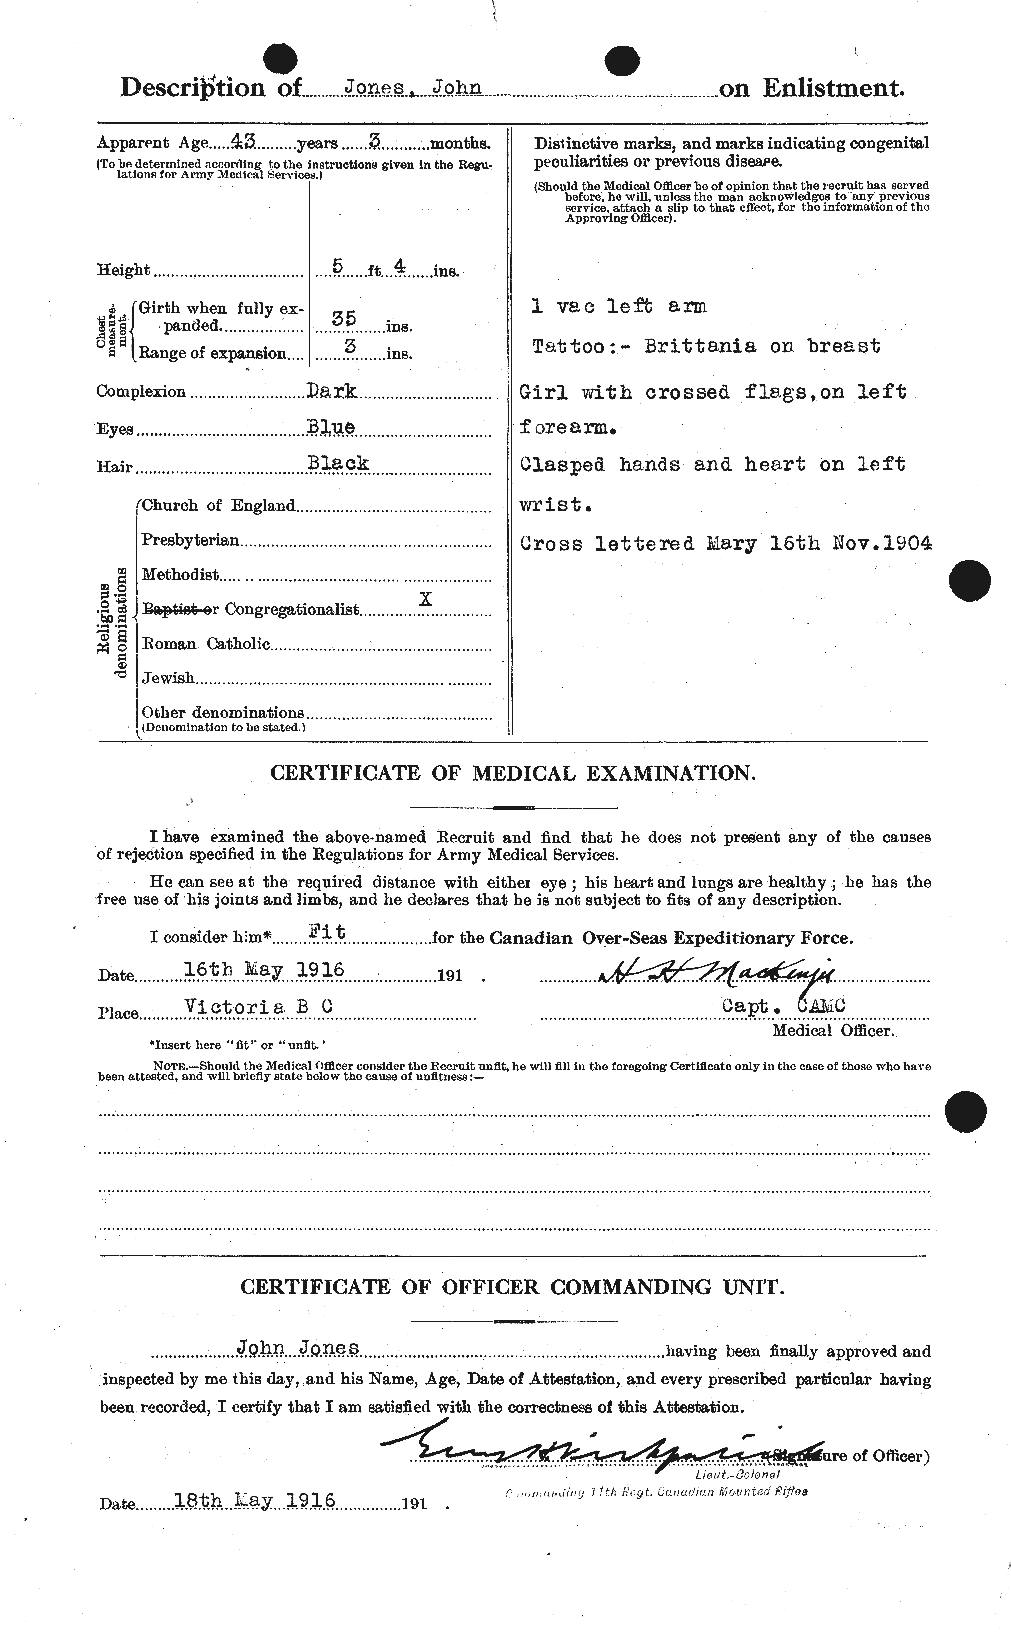 Personnel Records of the First World War - CEF 427479b